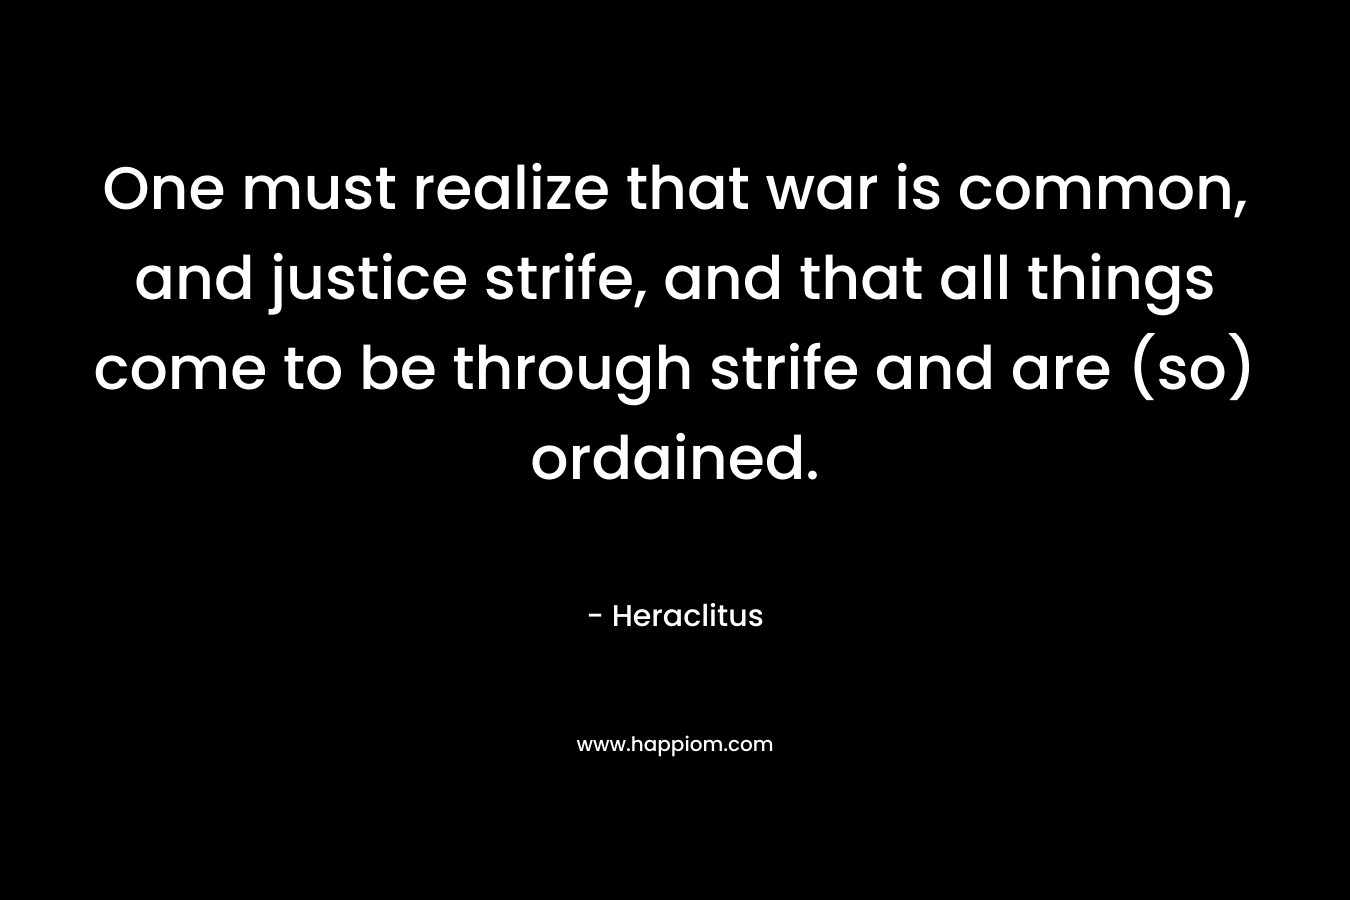 One must realize that war is common, and justice strife, and that all things come to be through strife and are (so) ordained. – Heraclitus